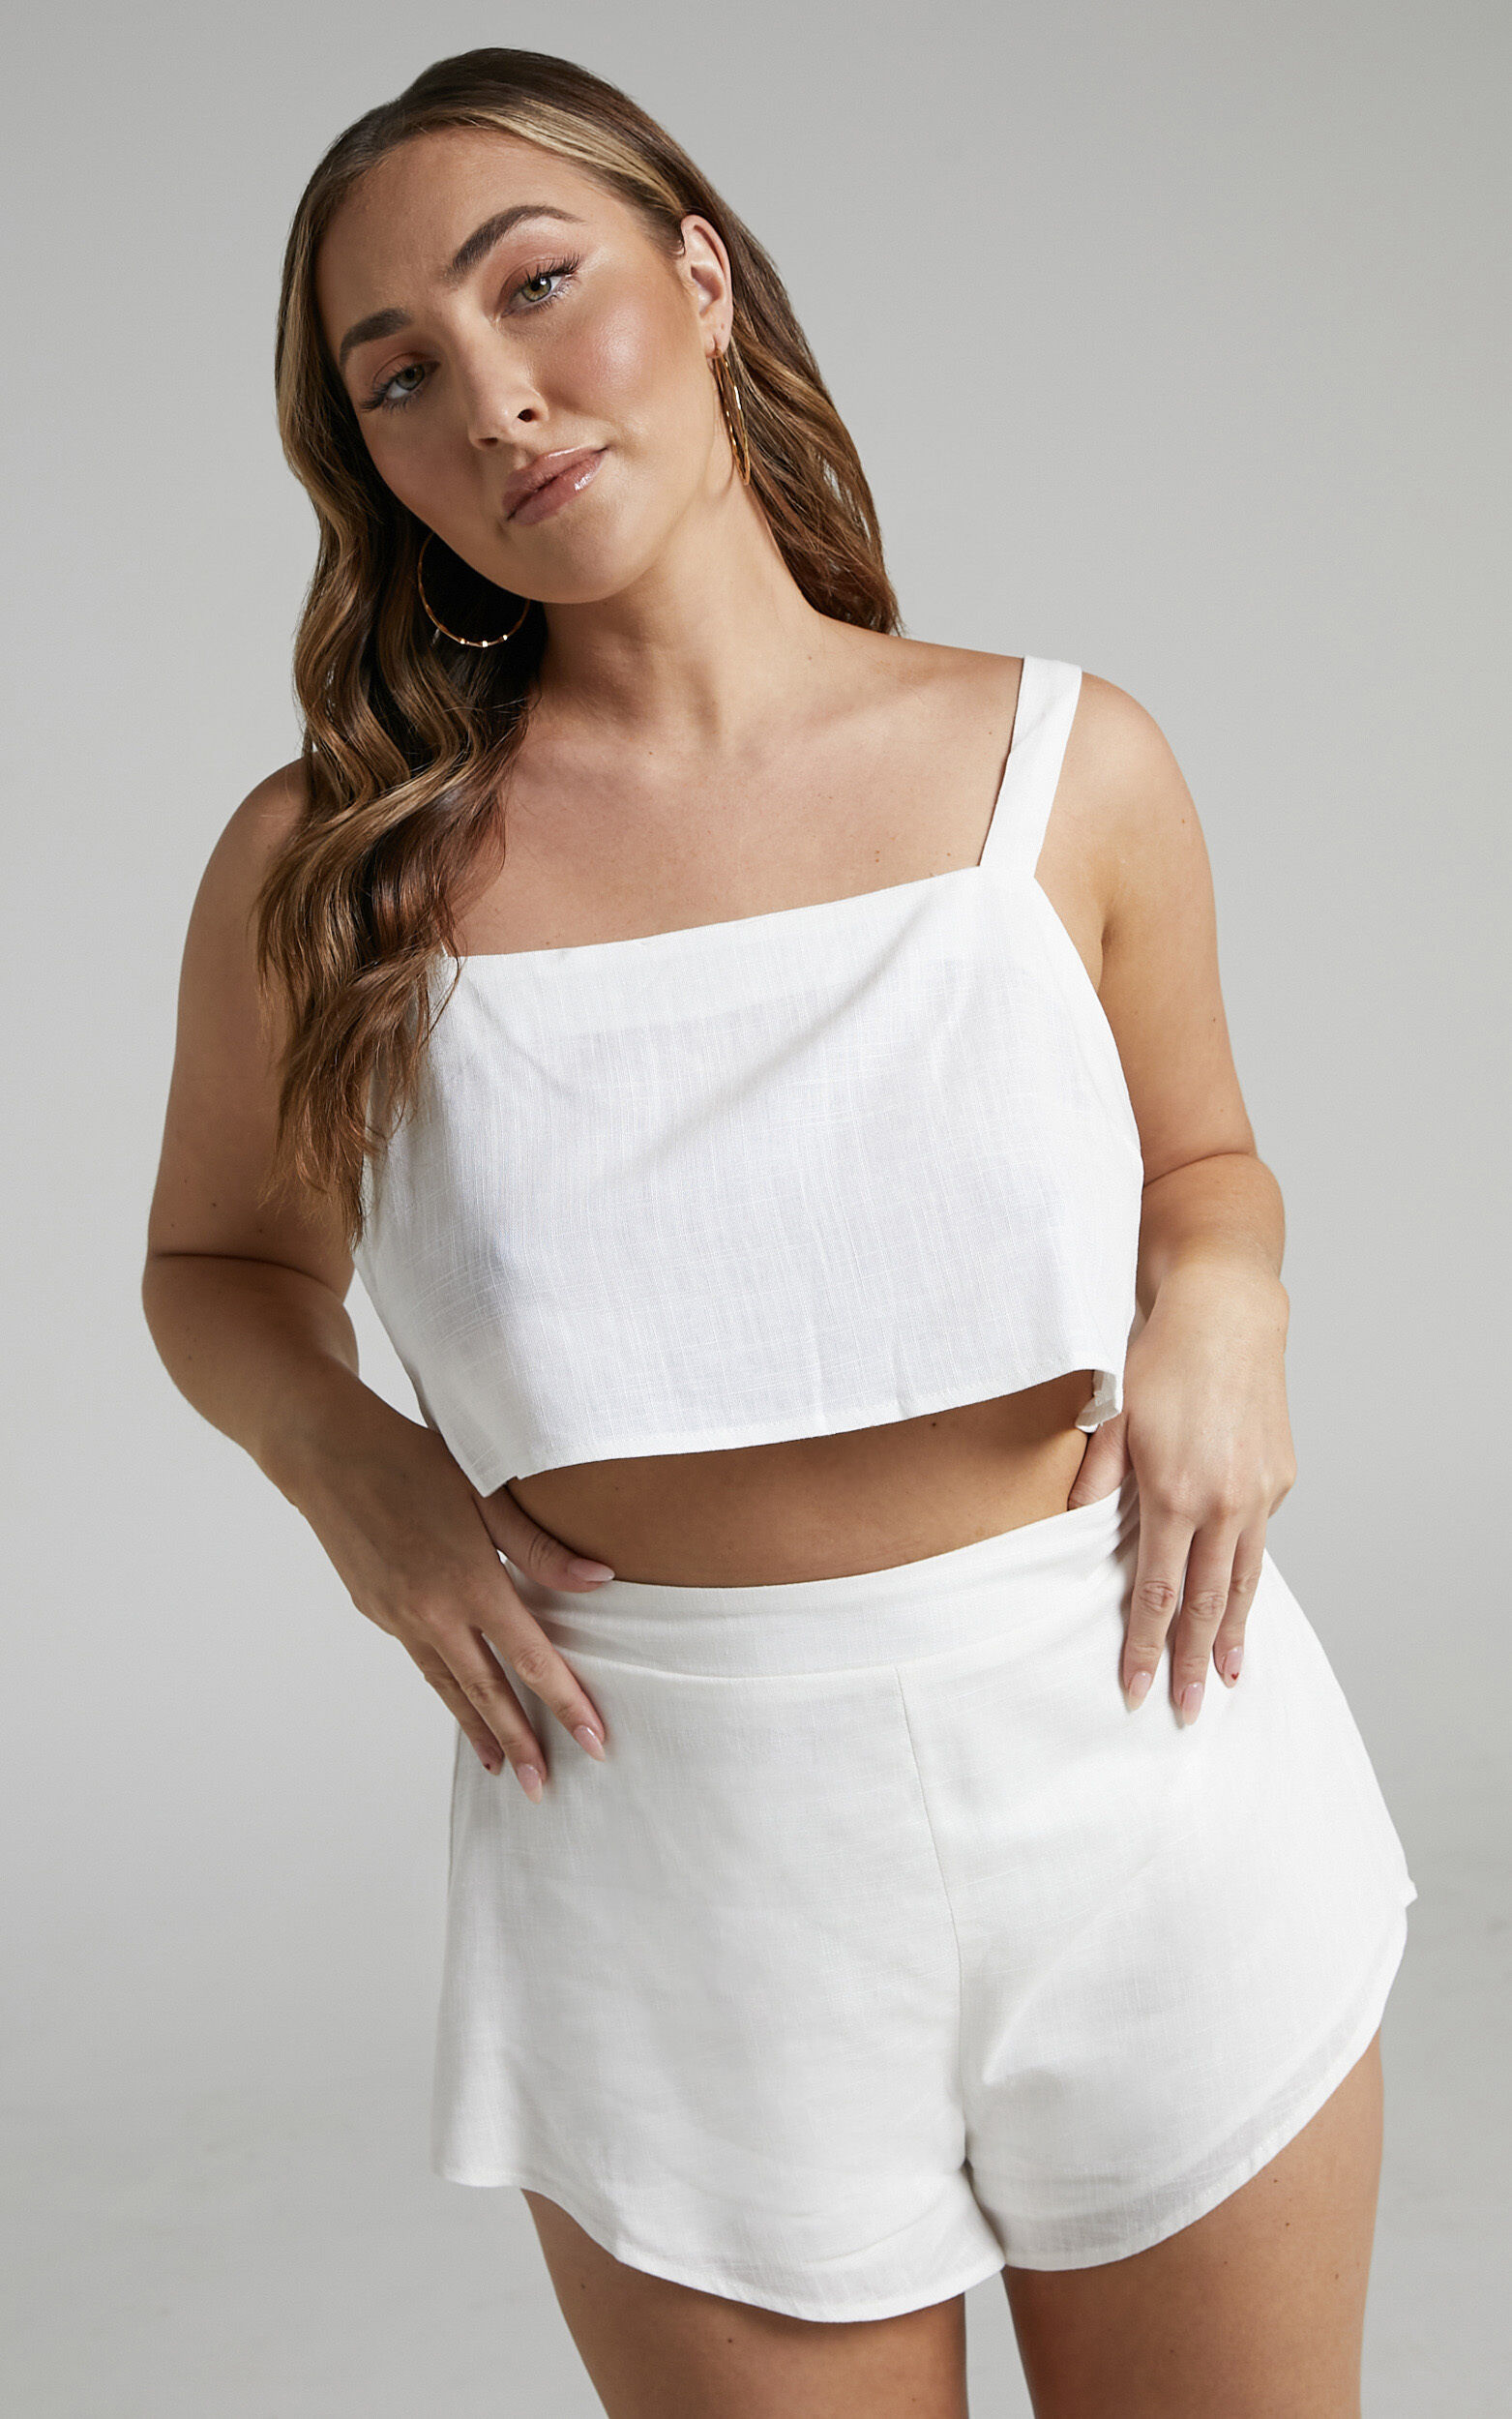 Zanrie Square Neck Crop Top and High Waist Mini Flare Shorts in White Linen Look - 14, WHT5, super-hi-res image number null